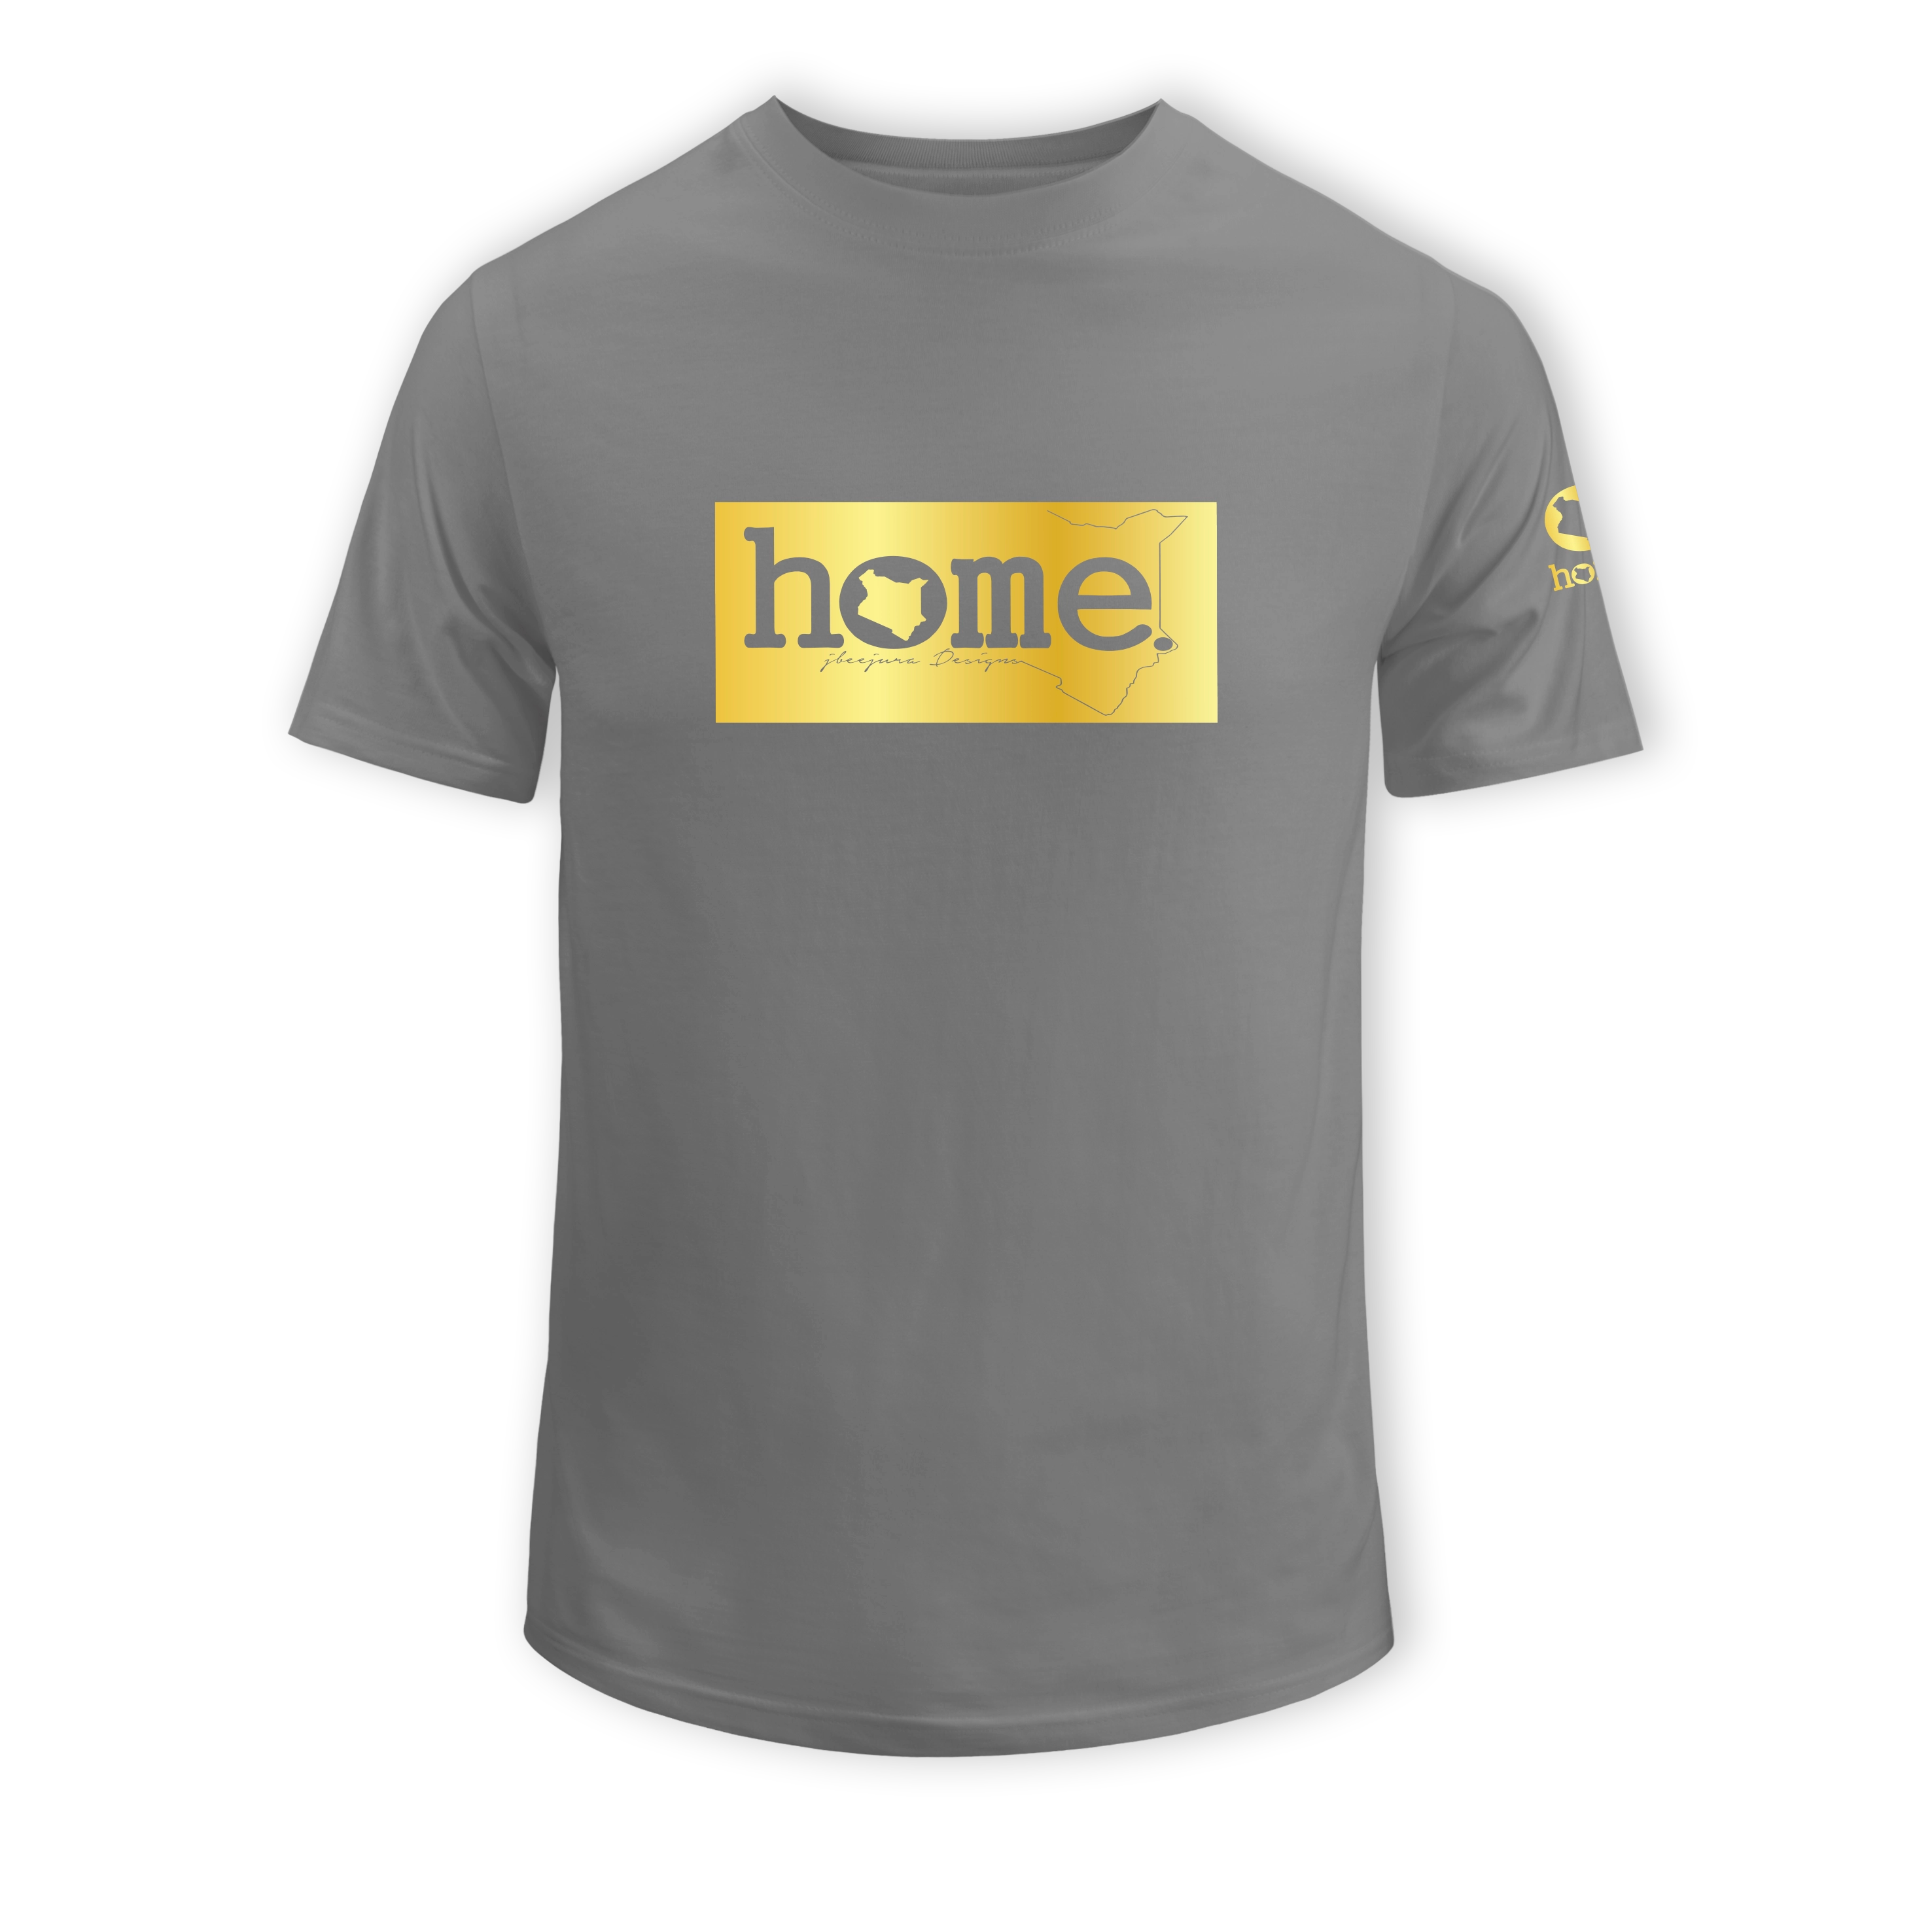 home_254 SHORT-SLEEVED SAGE T-SHIRT WITH A GOLD CLASSIC PRINT – COTTON PLUS FABRIC